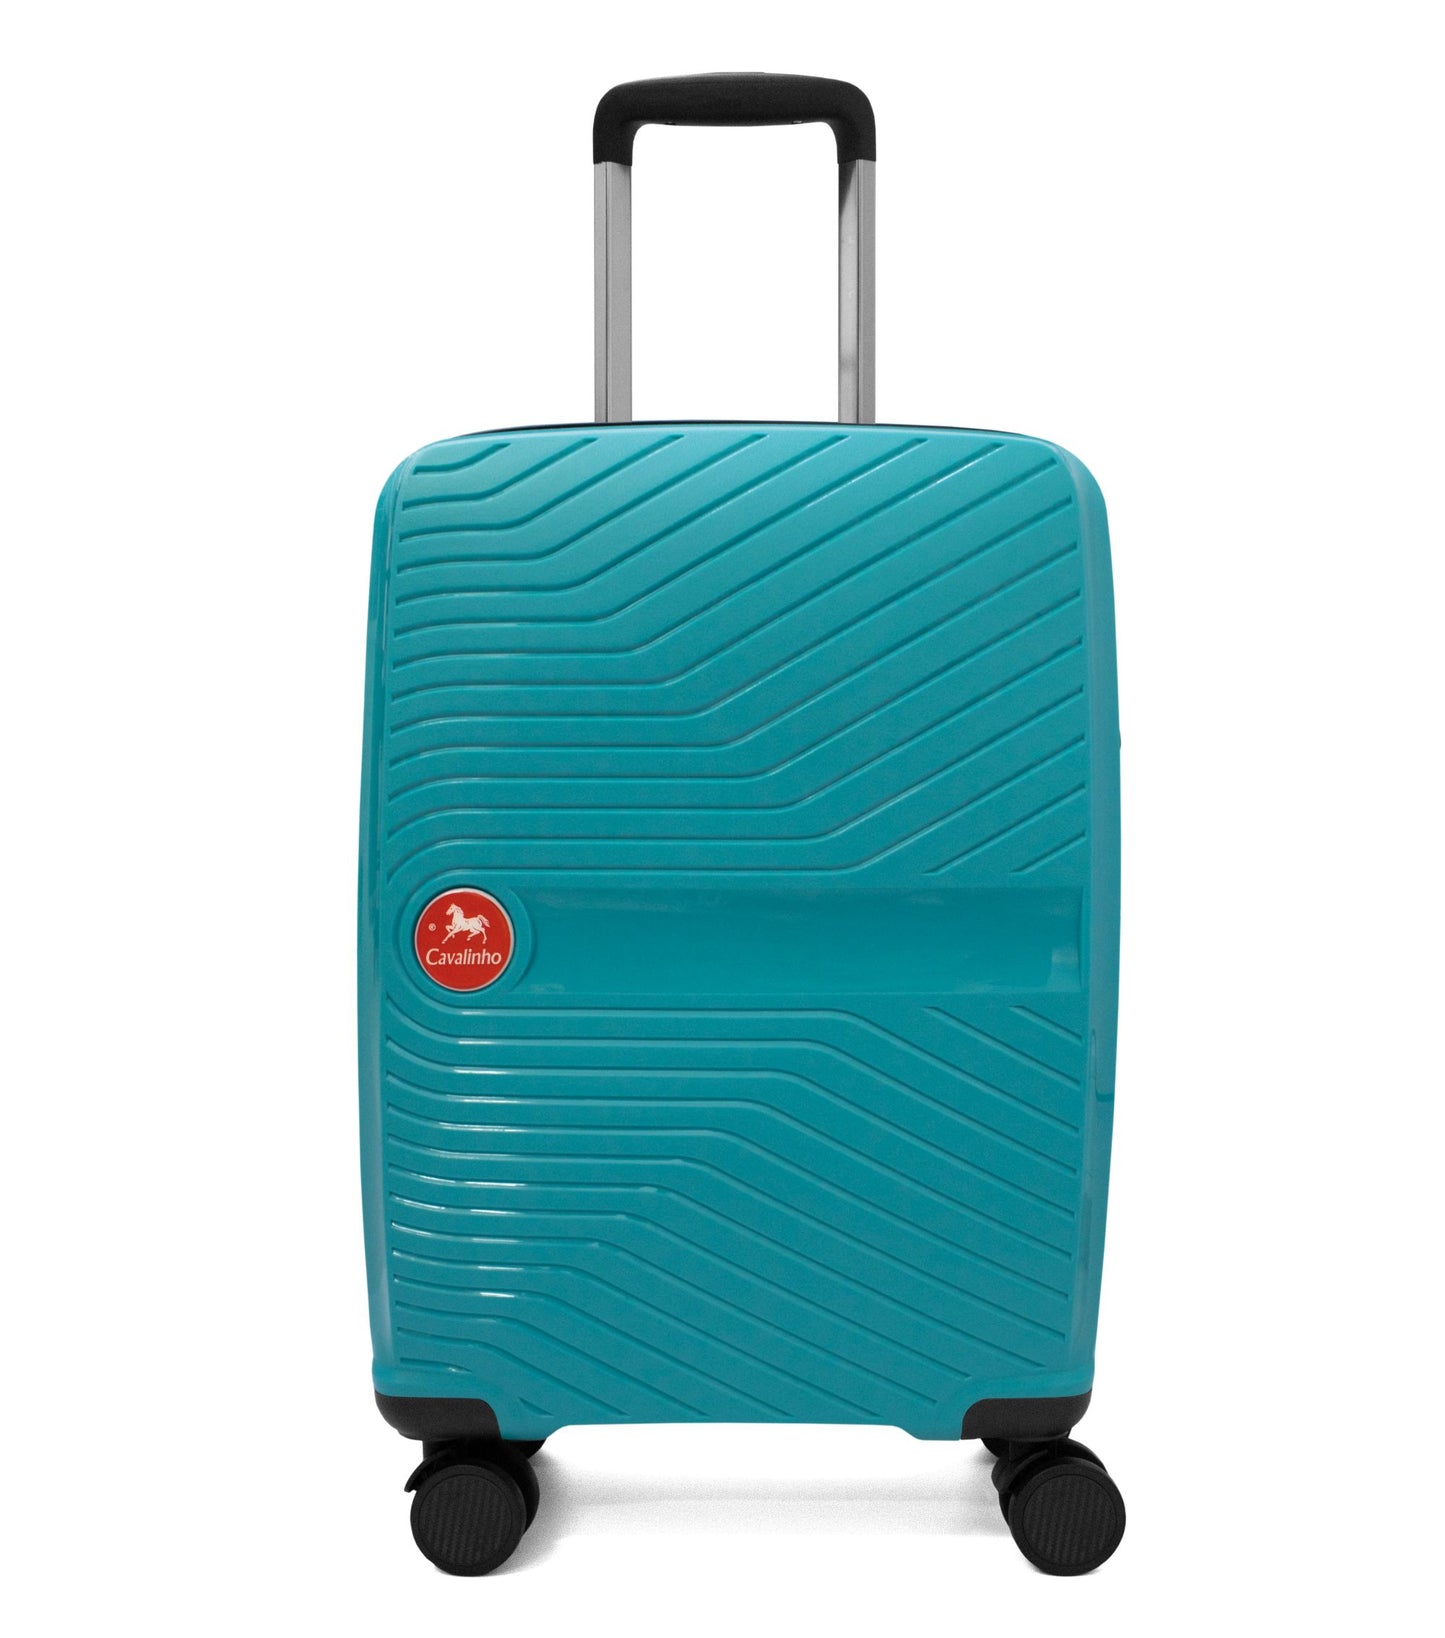 Cavalinho Colorful Carry-on Hardside Luggage (19") - 19 inch DarkTurquoise - 68020004.25.19_1